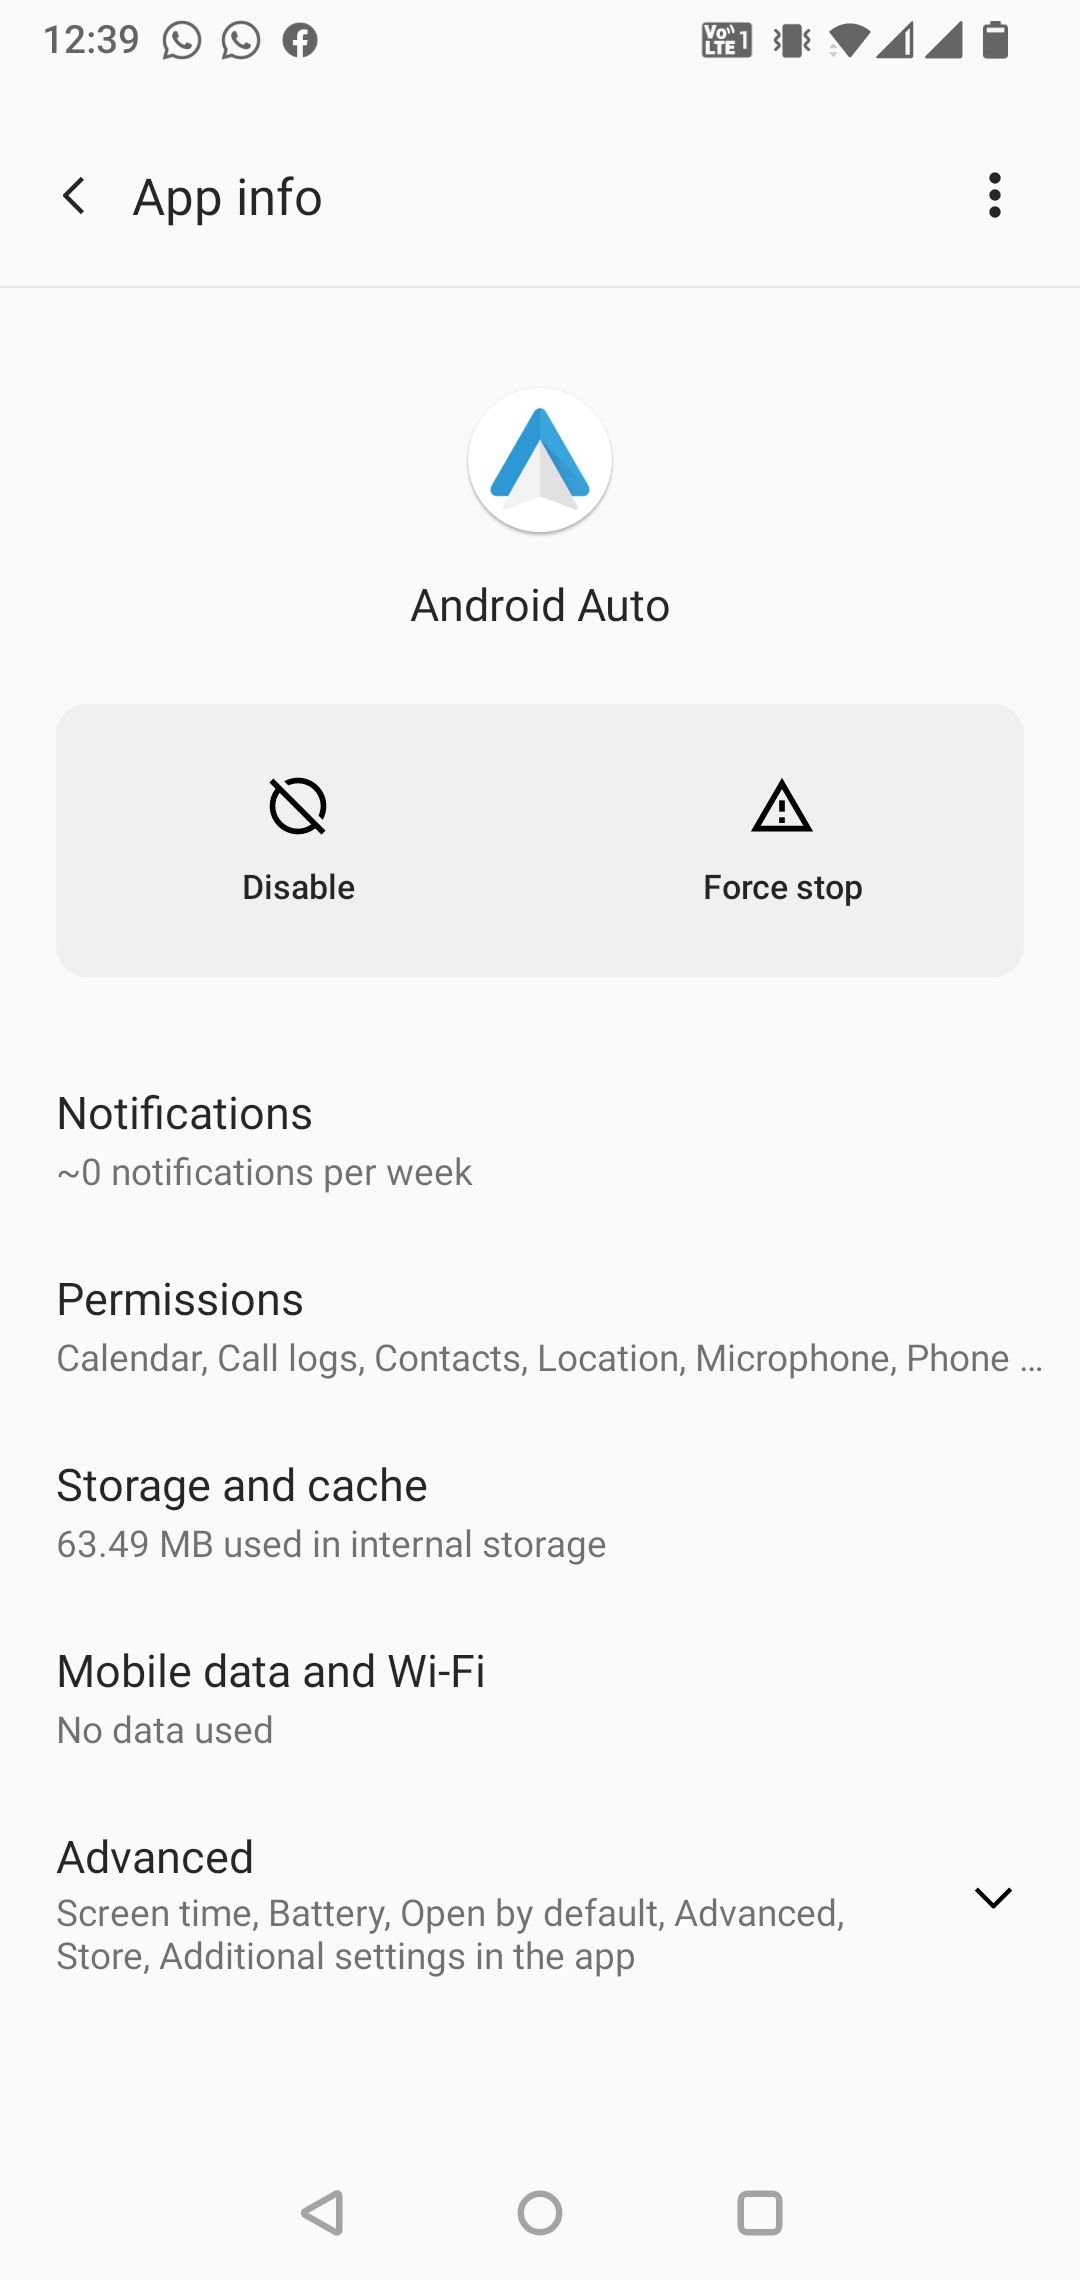 Screenshot shows the app info page for Android Auto. Storage and cache is one of the displayed options.